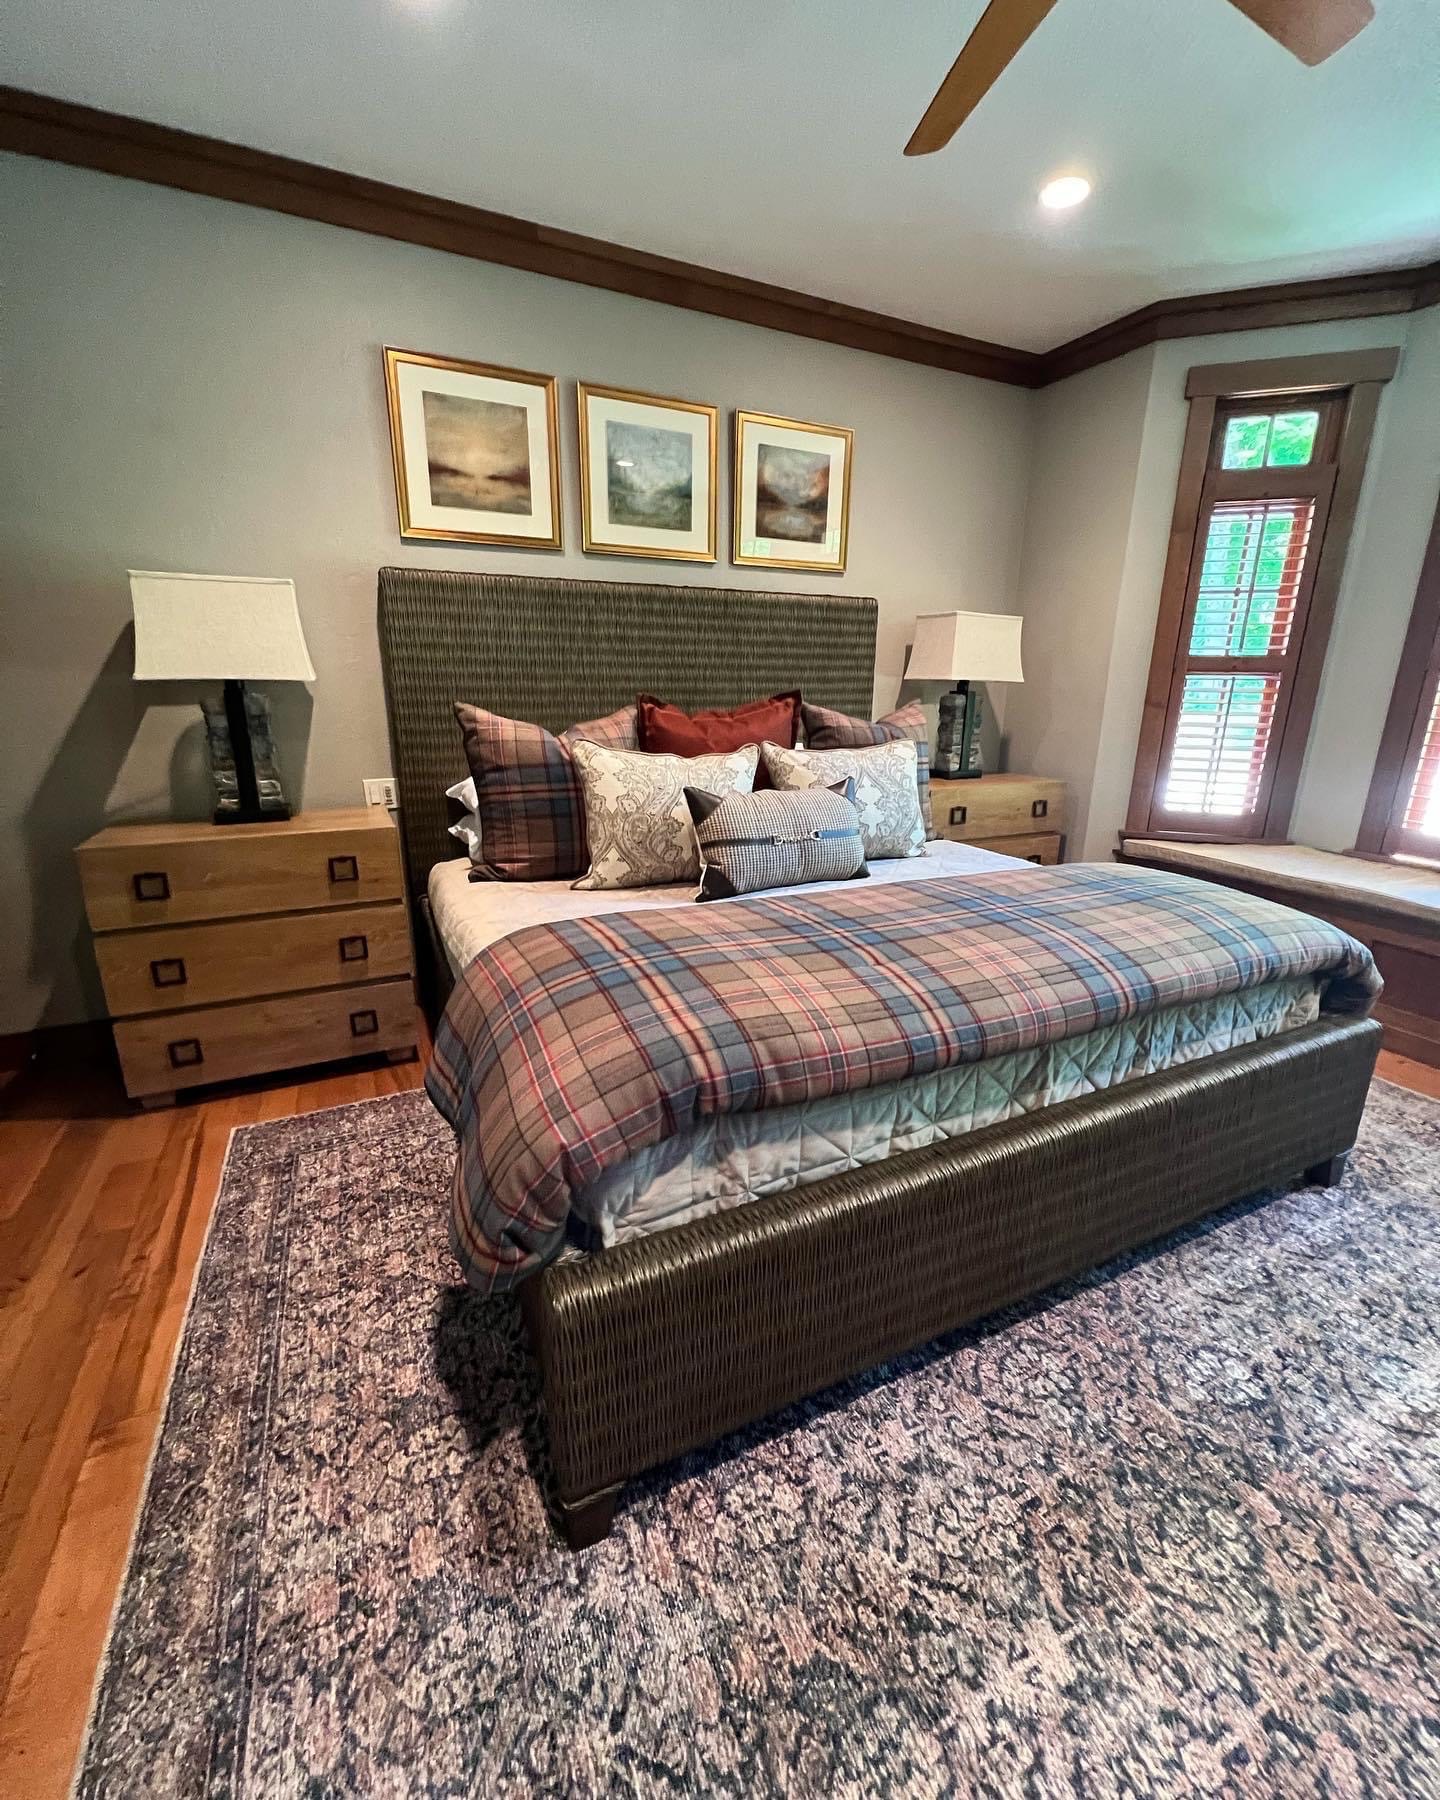 River Lodge Bedroom with Area Rug